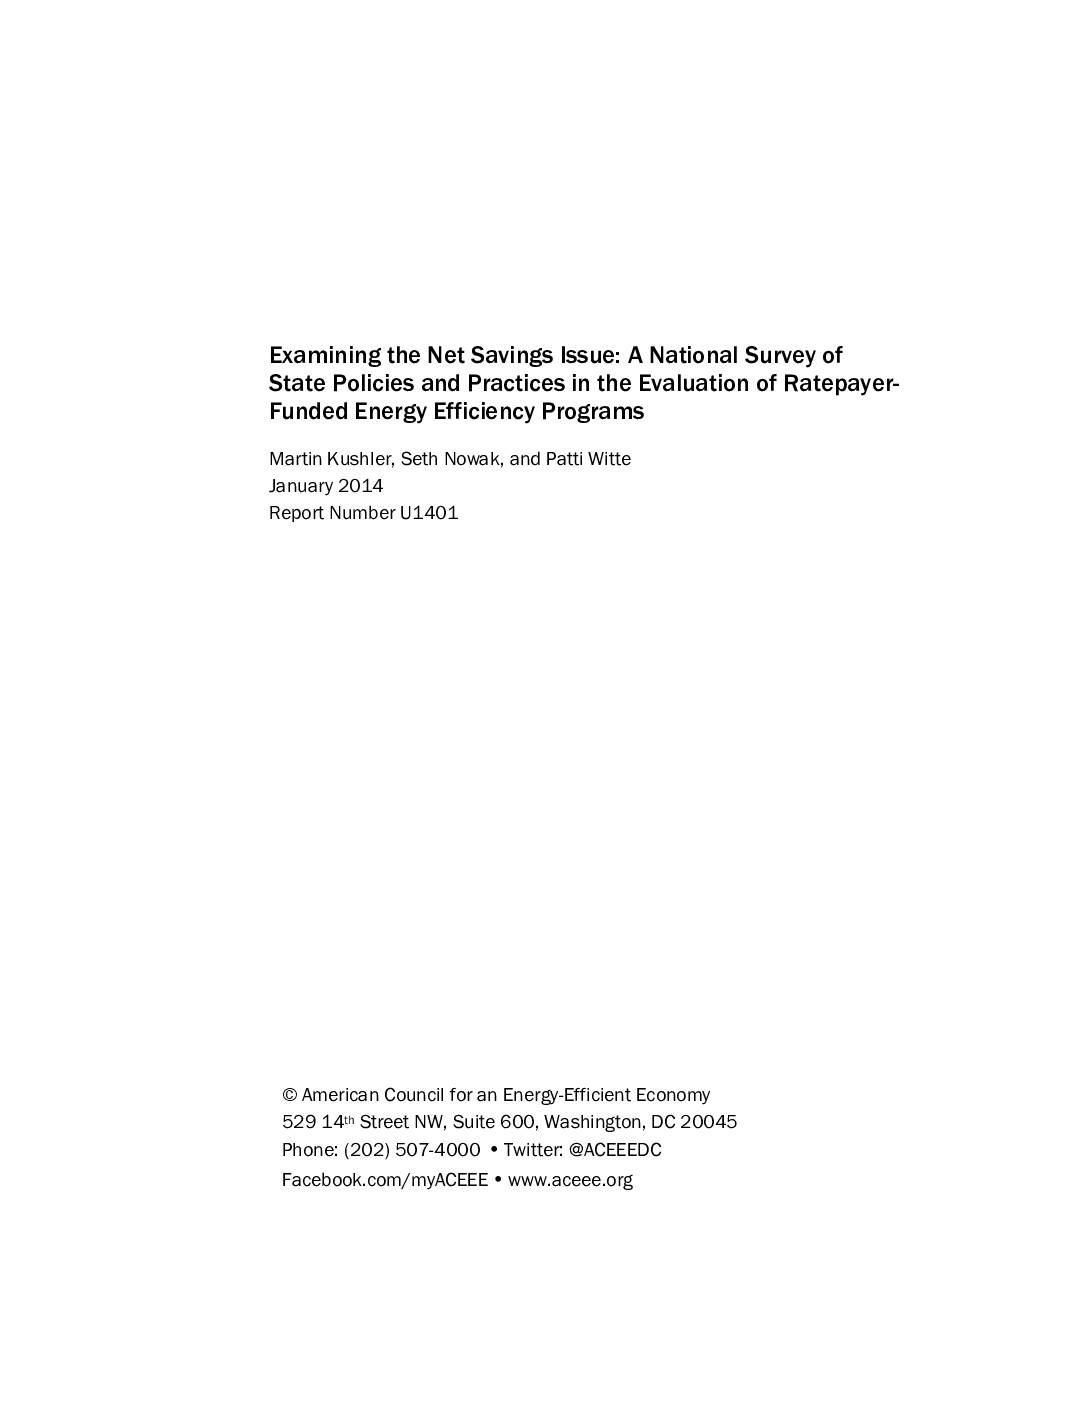 Examining the Net Savings Issue: A National Survey of State Policies and Practices in the Evaluation of Ratepayer-Funded Energy Efficiency Programs